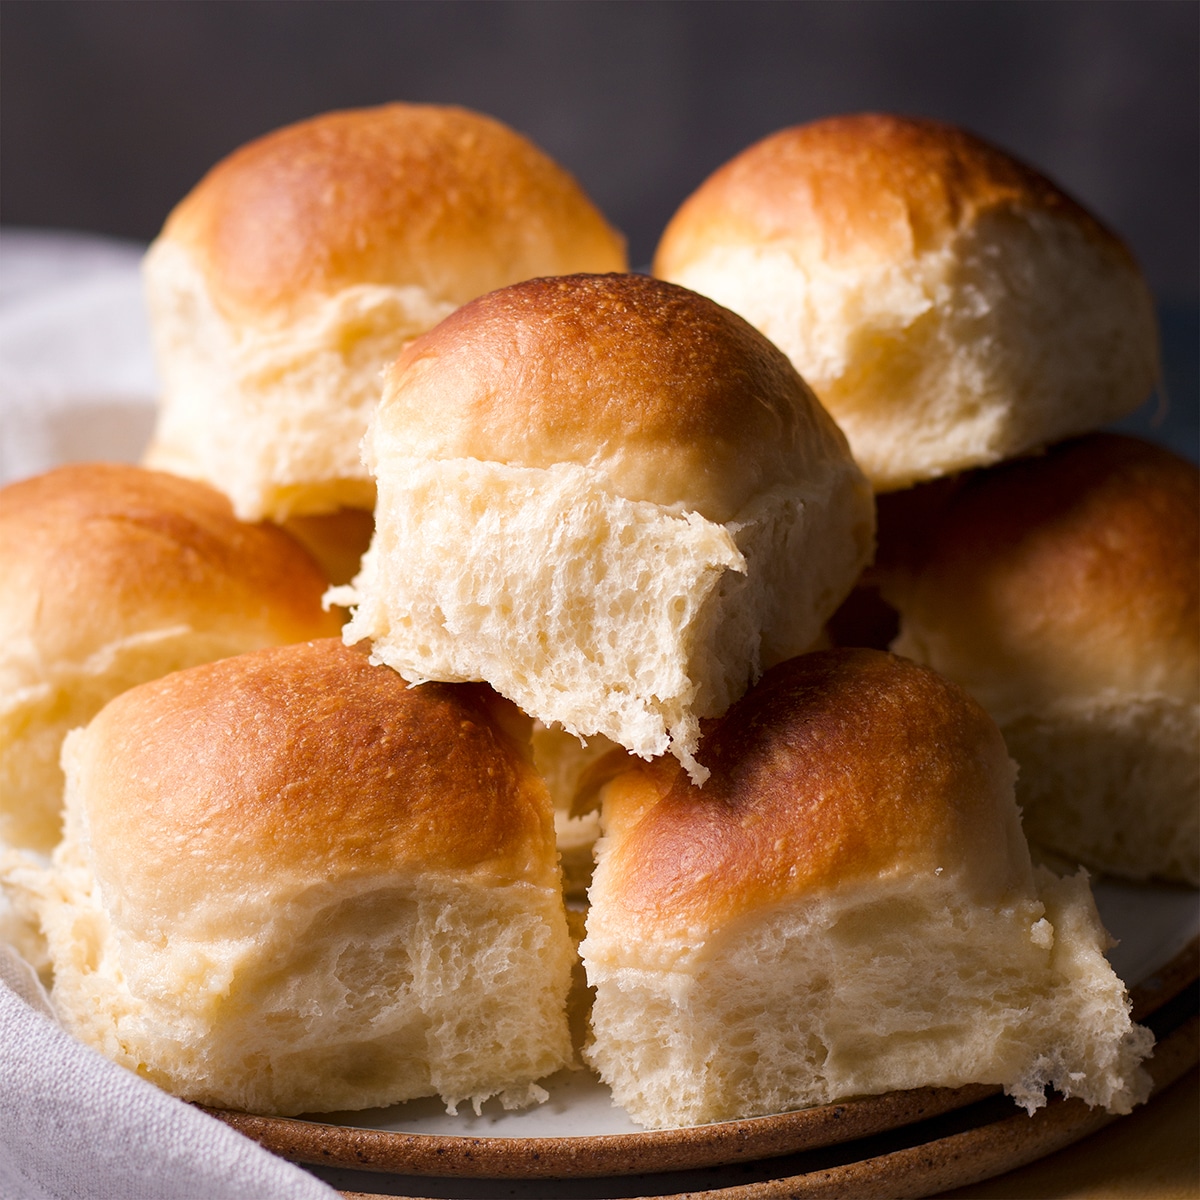 A plate piled high with homemade dinner rolls.